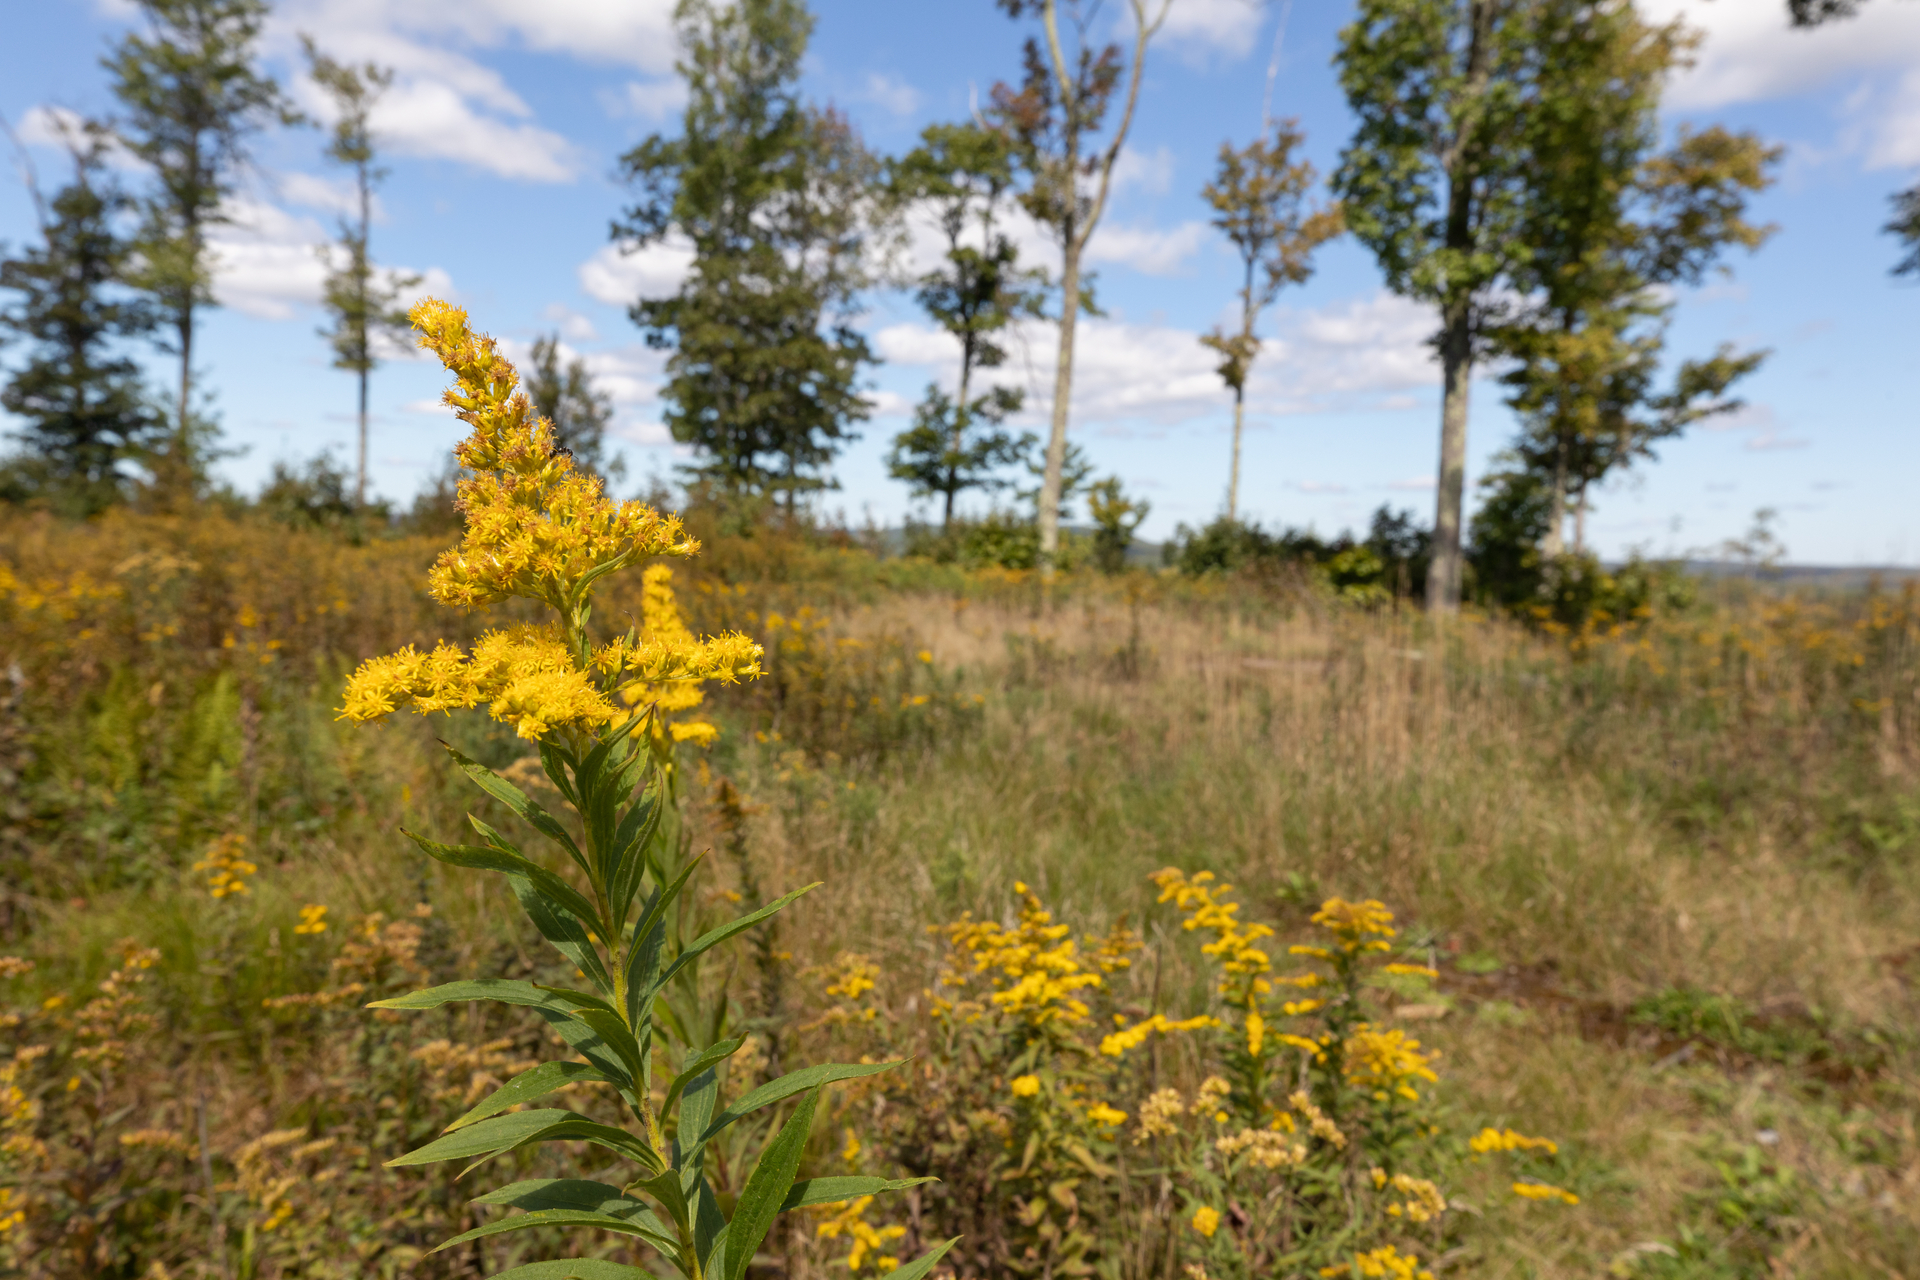 Yellow flower in the forefront with grassland and trees in the background.